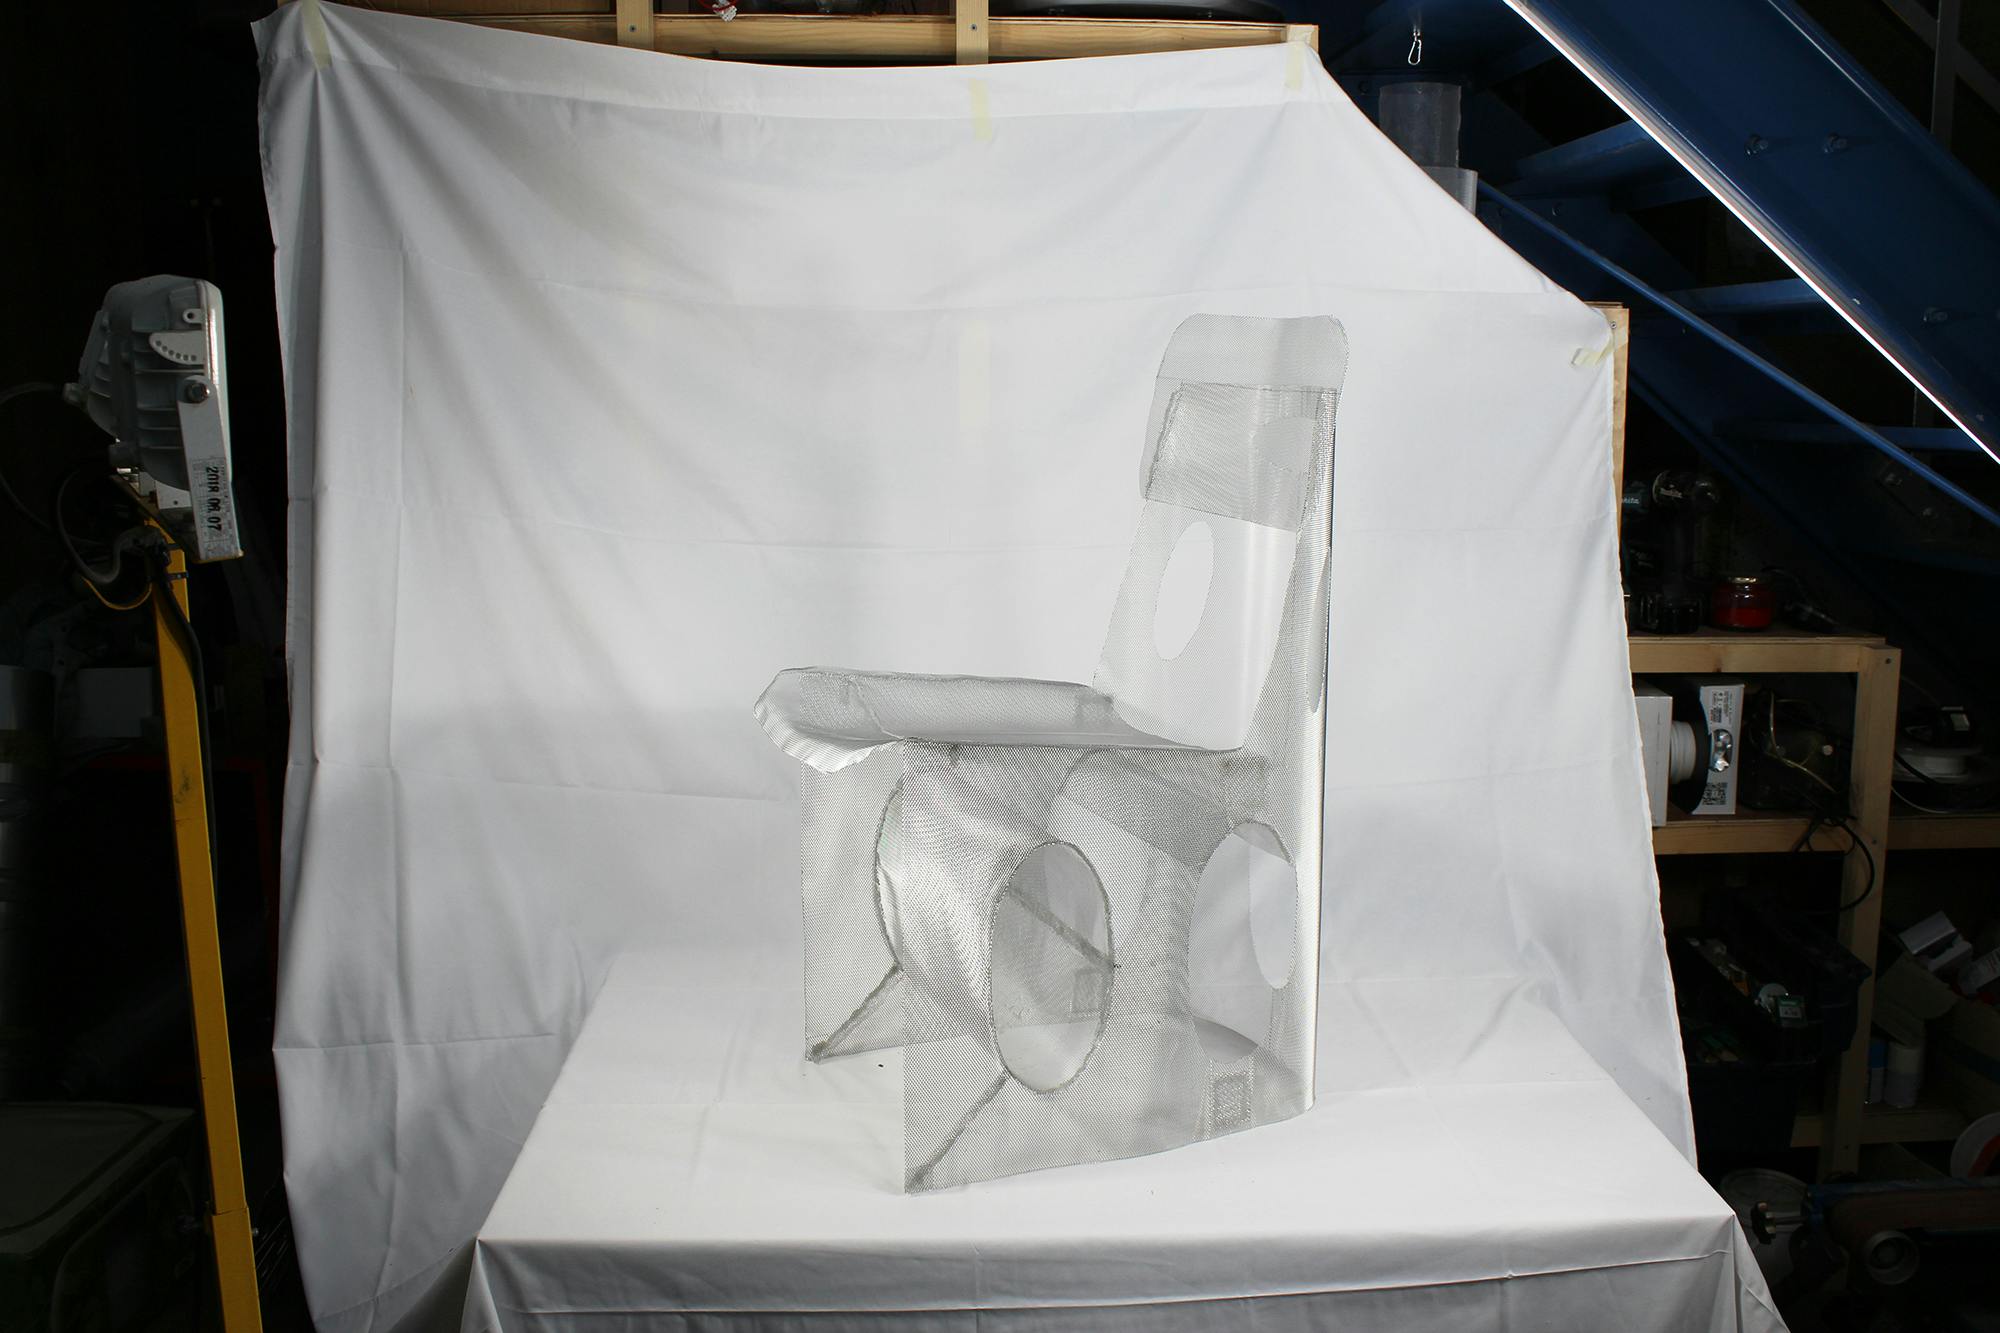 The metal mesh frame of a chair from Korean Designer, Seongil Choi's Hardned Mesh Project